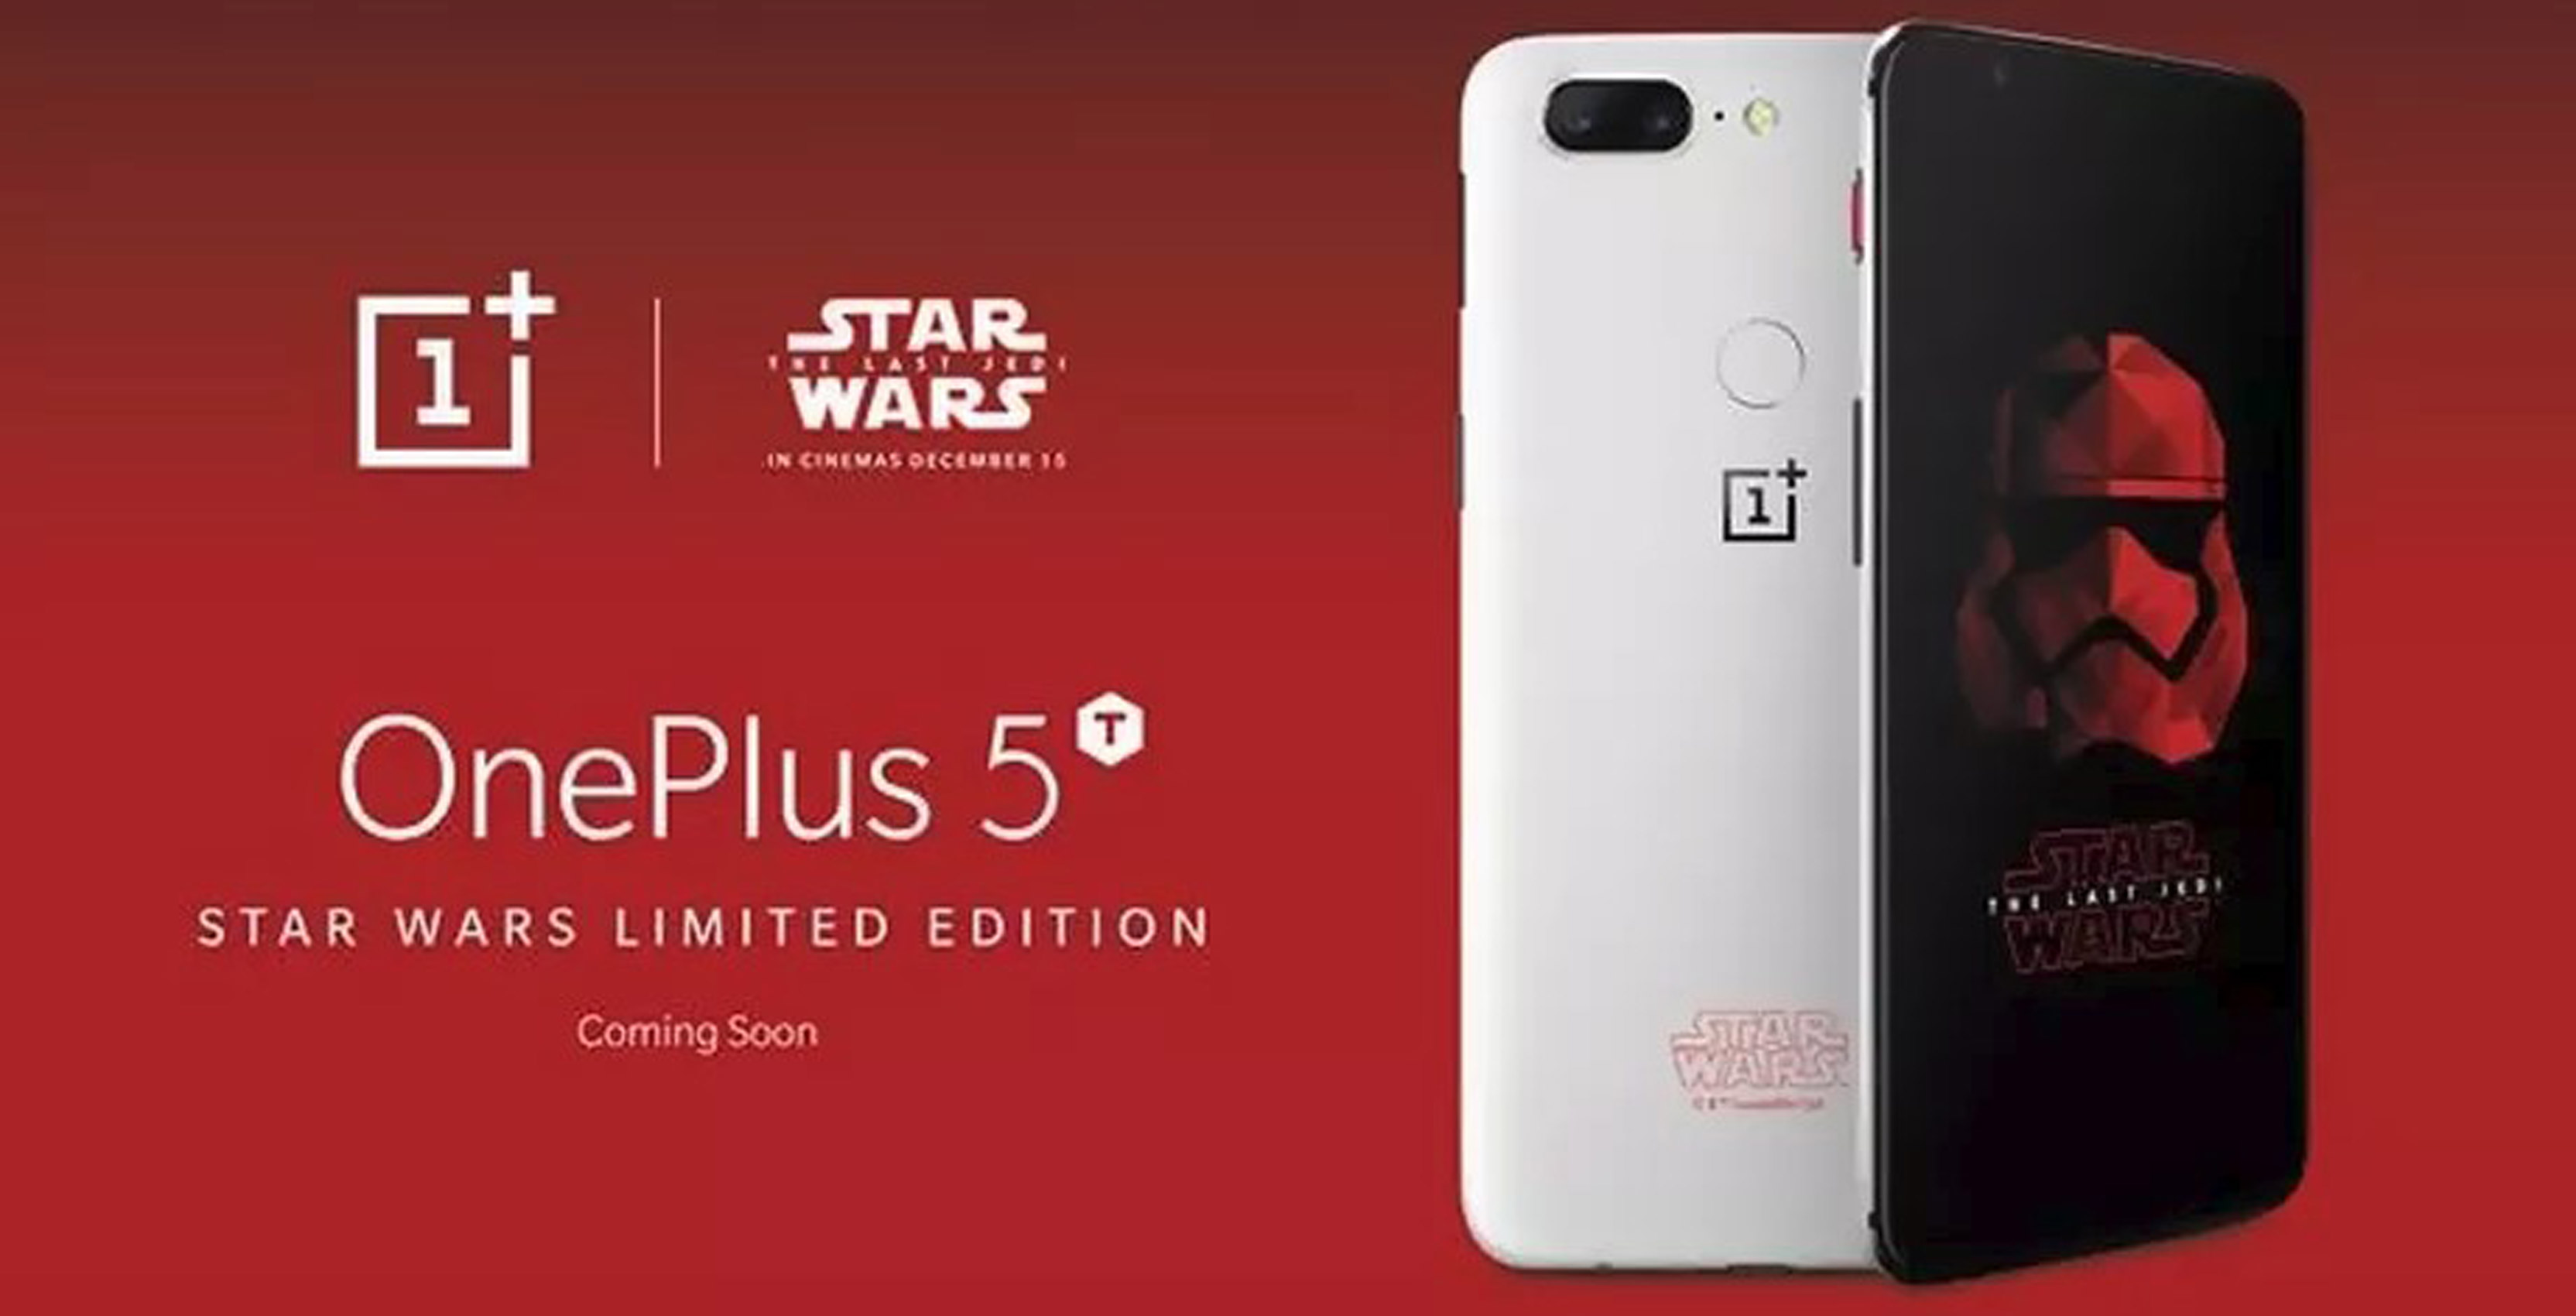 Star Wars-themed OnePlus 5T smartphone